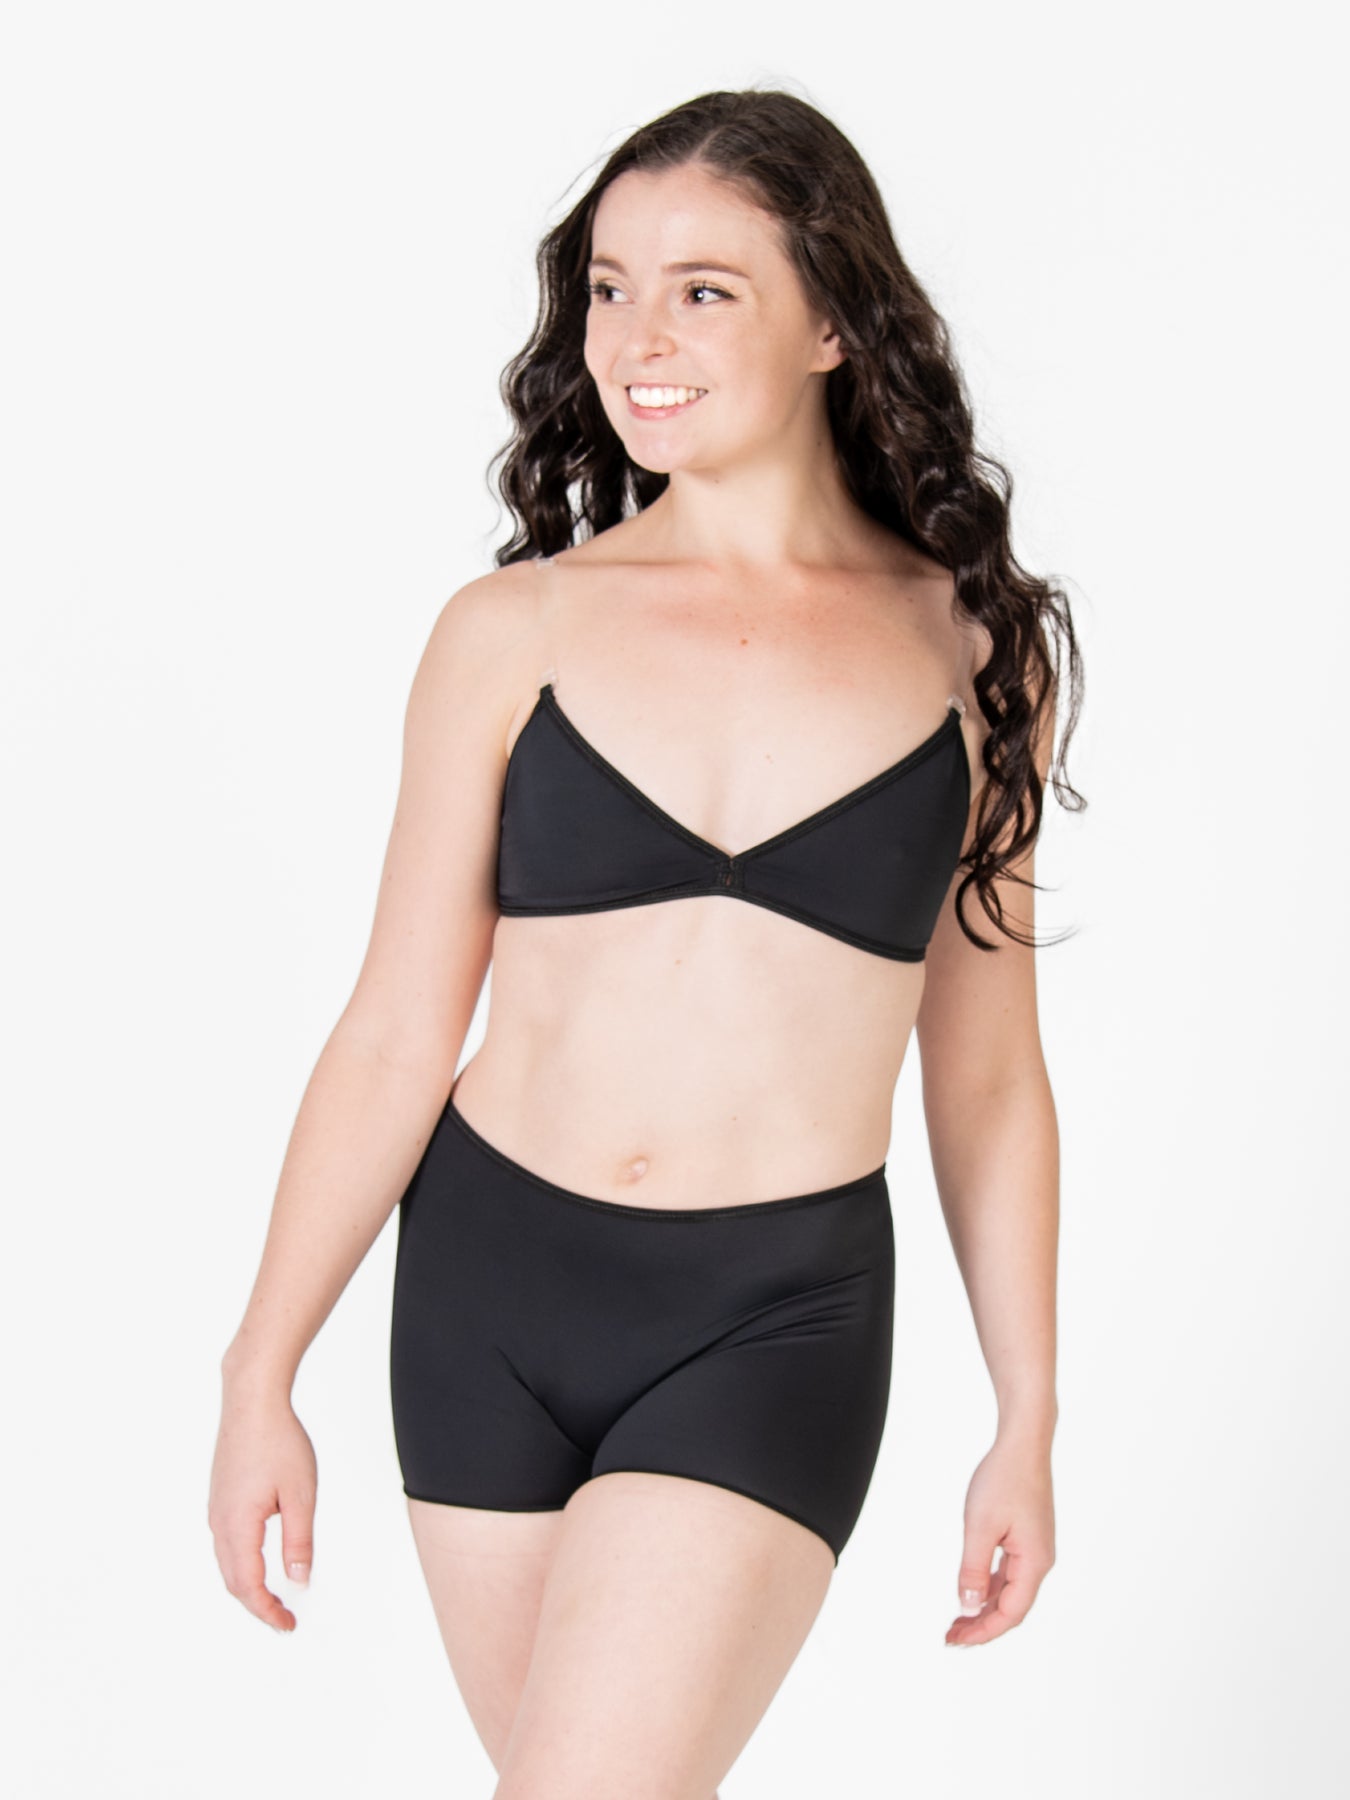 Body Wrappers Convertible Padded Bra - The Dance Shop of Logan